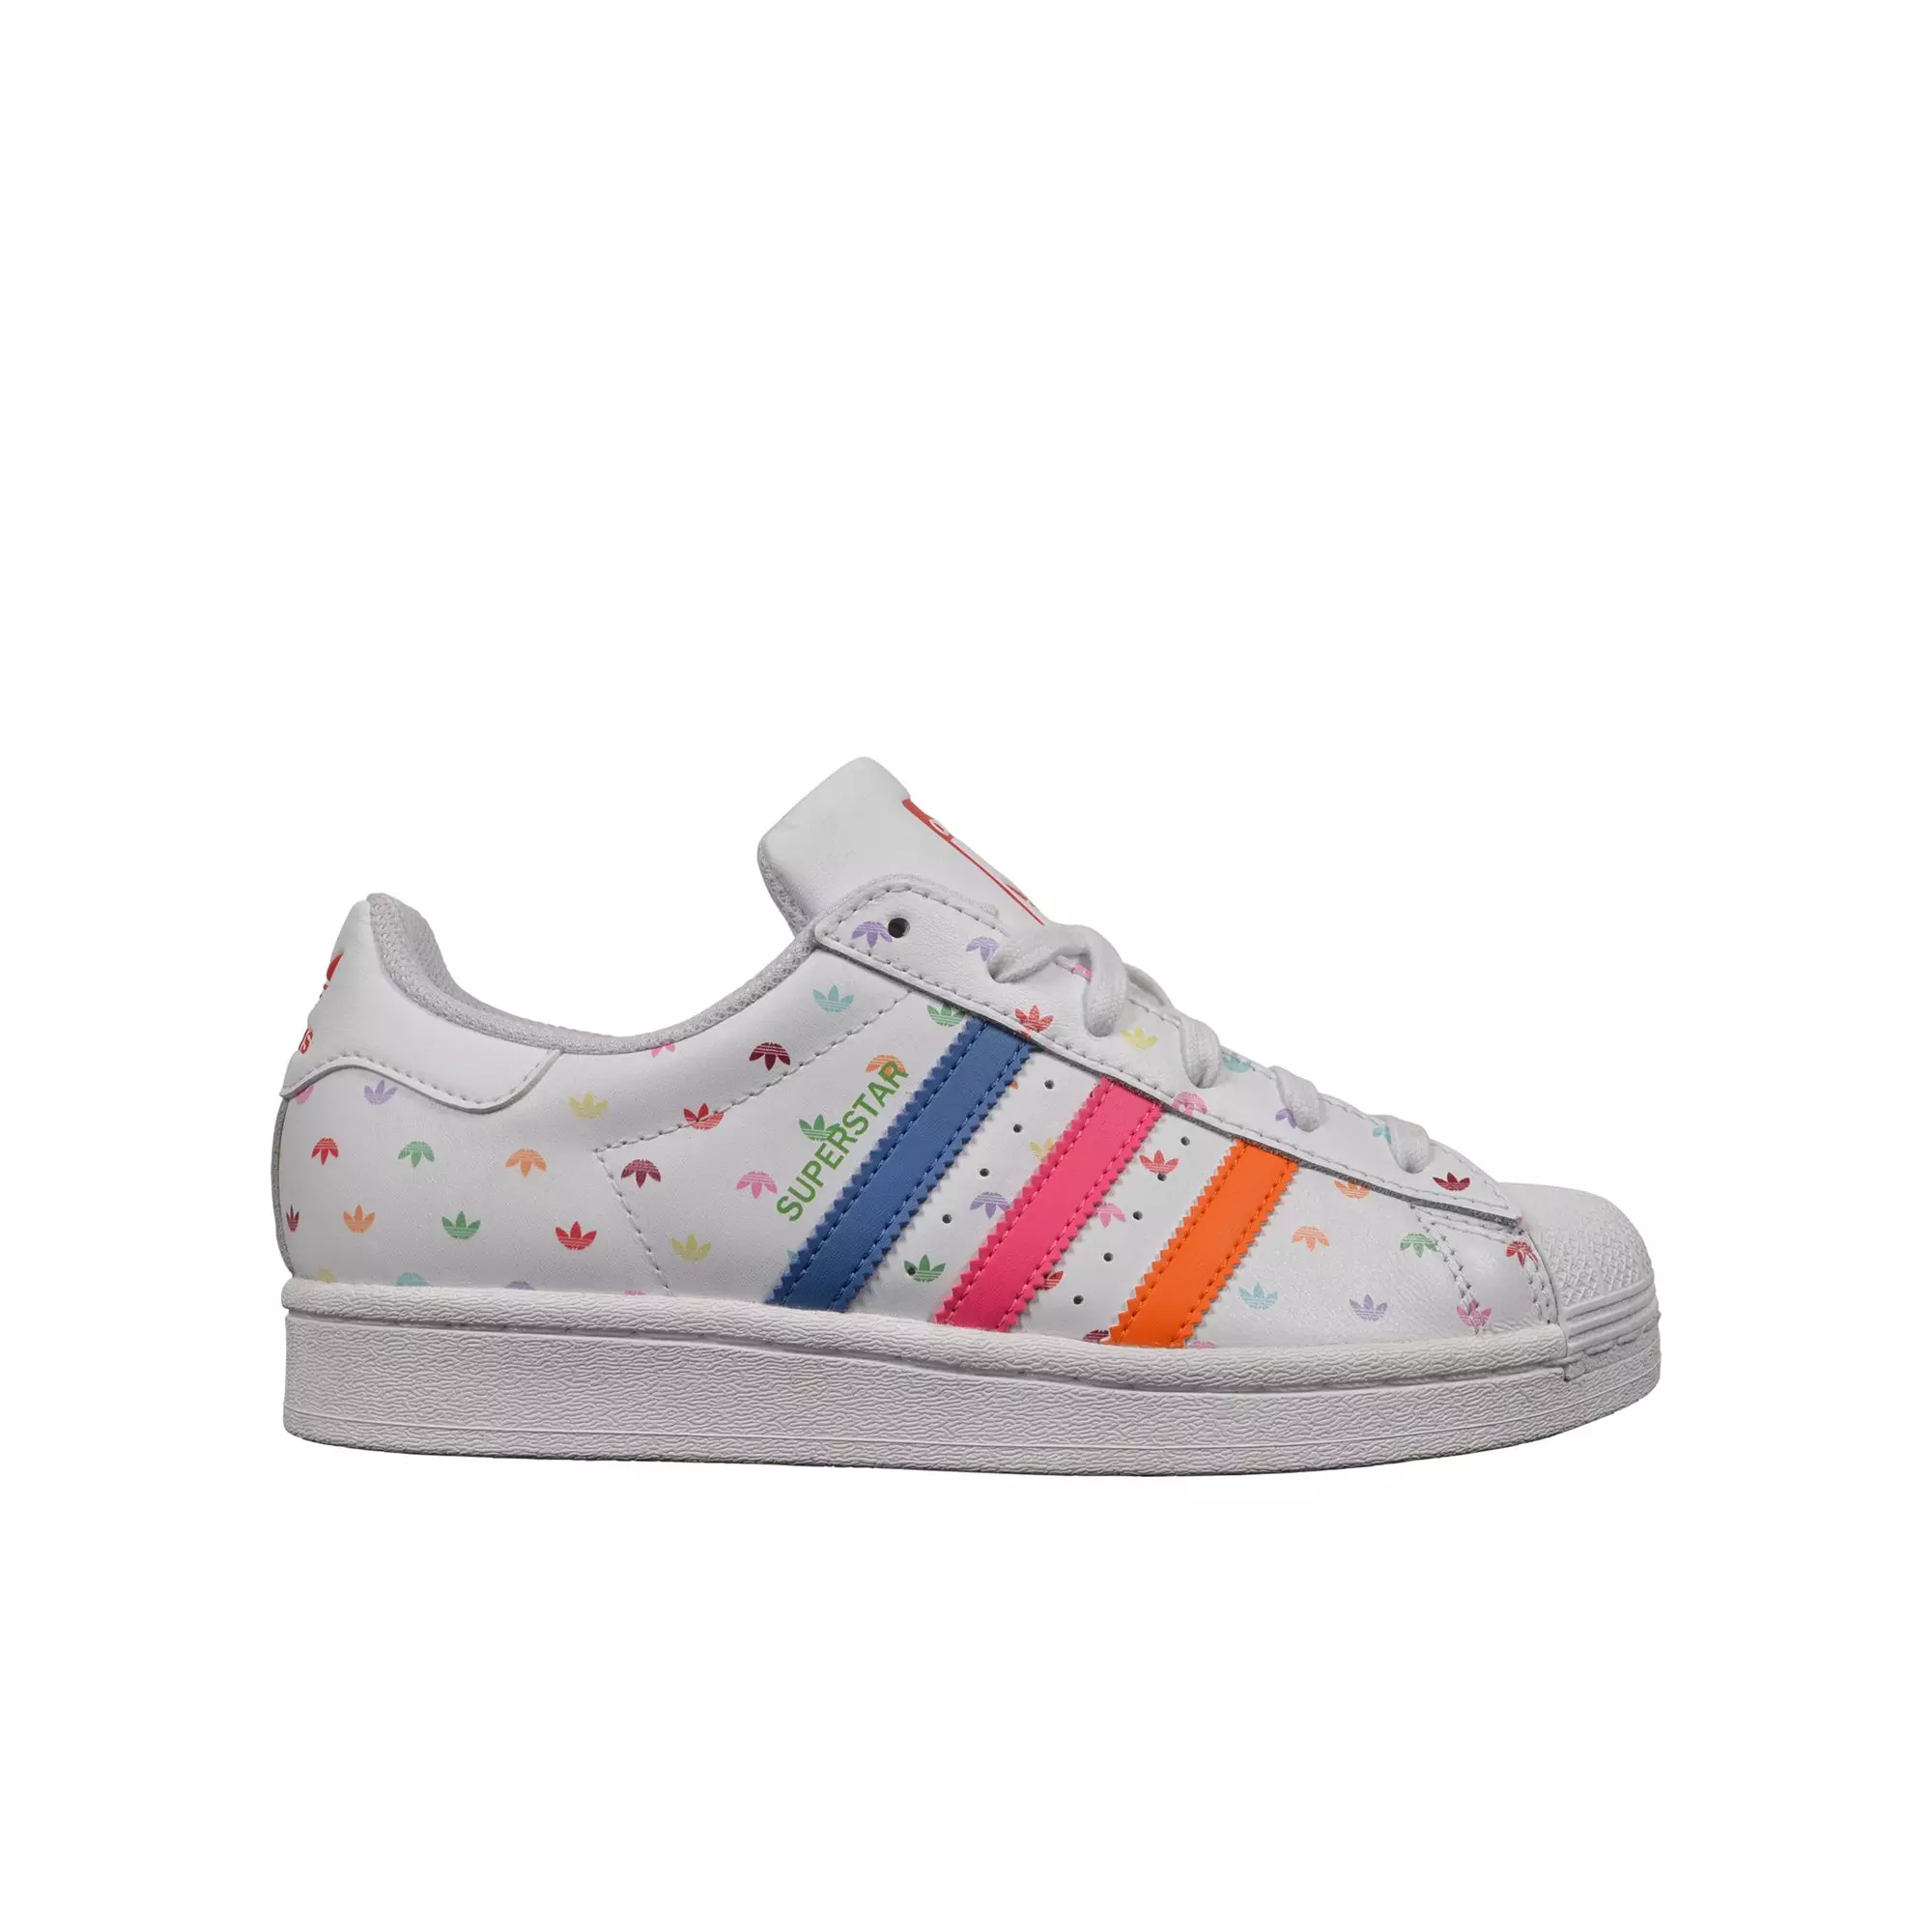 White Unisex ADIDAS SUPERSTAR PRIDE SNEAKERS, Size: 3 4 5 6 7 8 9